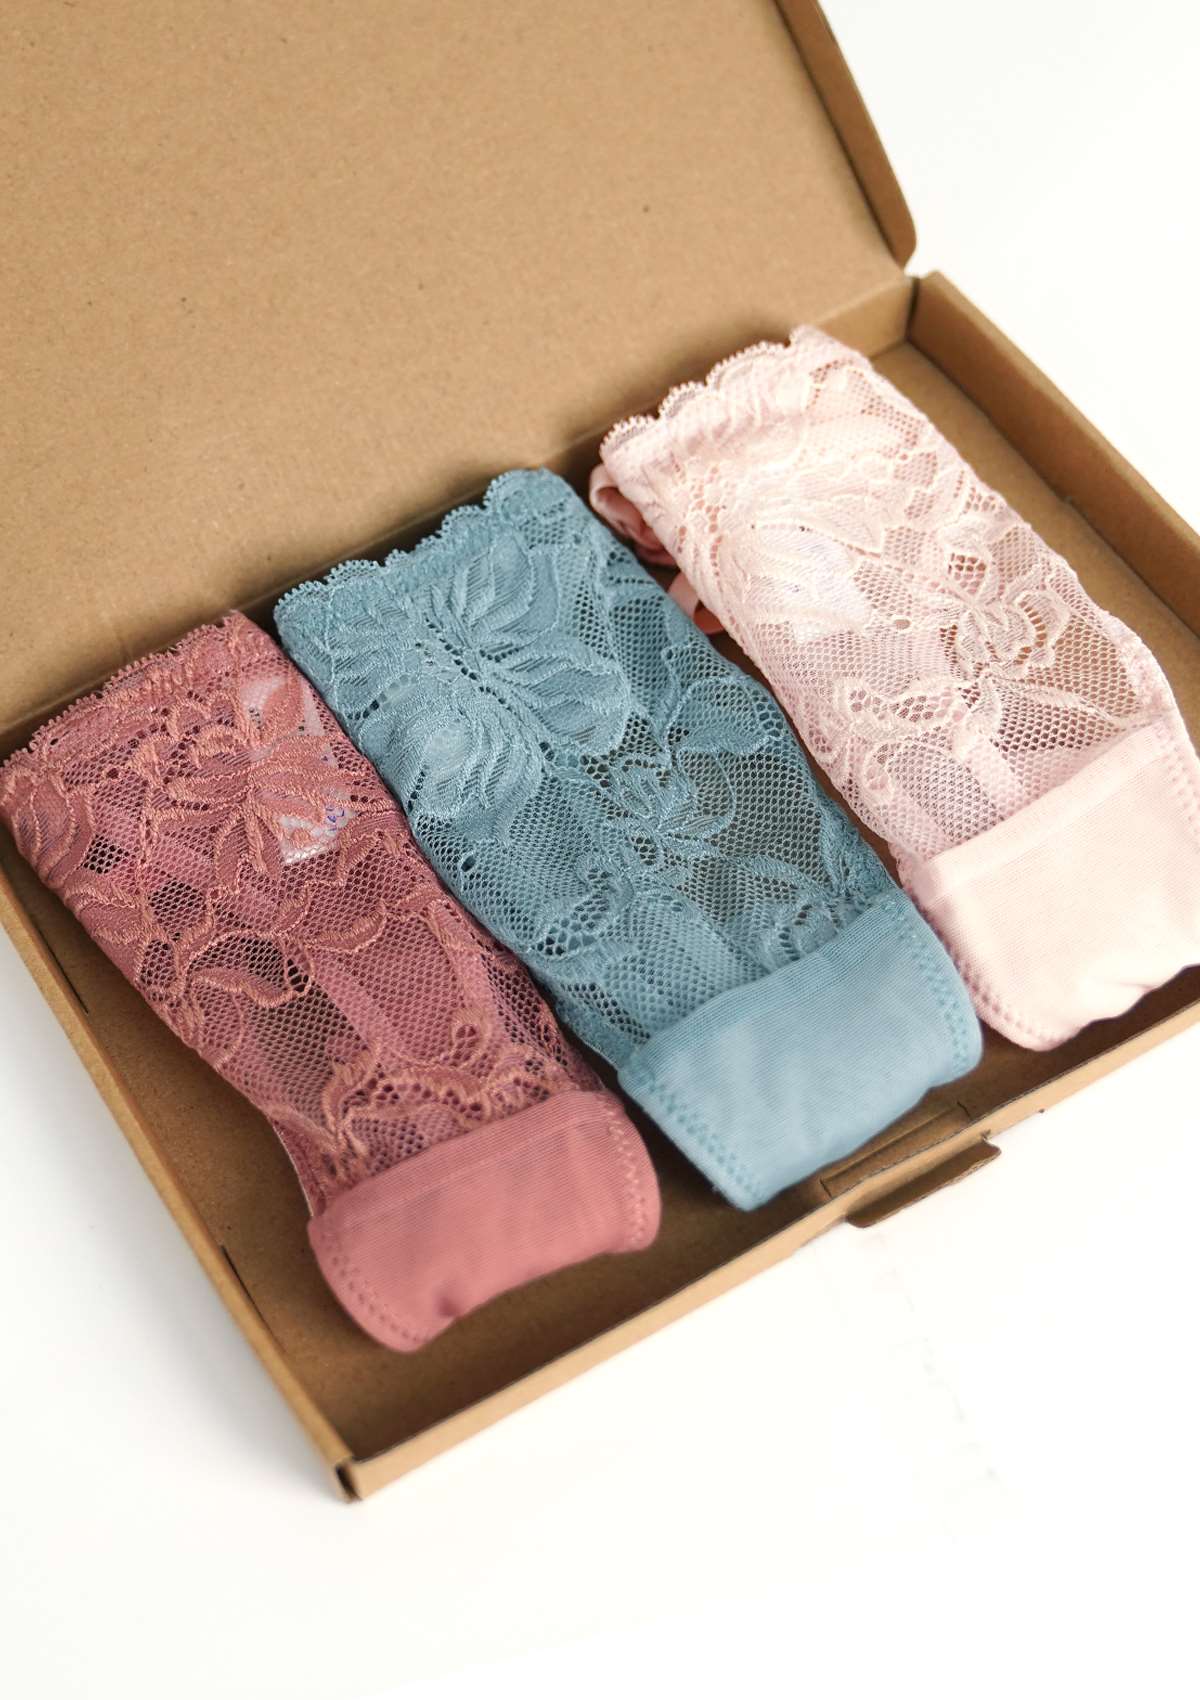 HSIA Pretty In Petals: 3-Pack Of Sexy Floral Chic Lace String Thongs - S / Light Coral+Dusty Peach+Pewter Blue